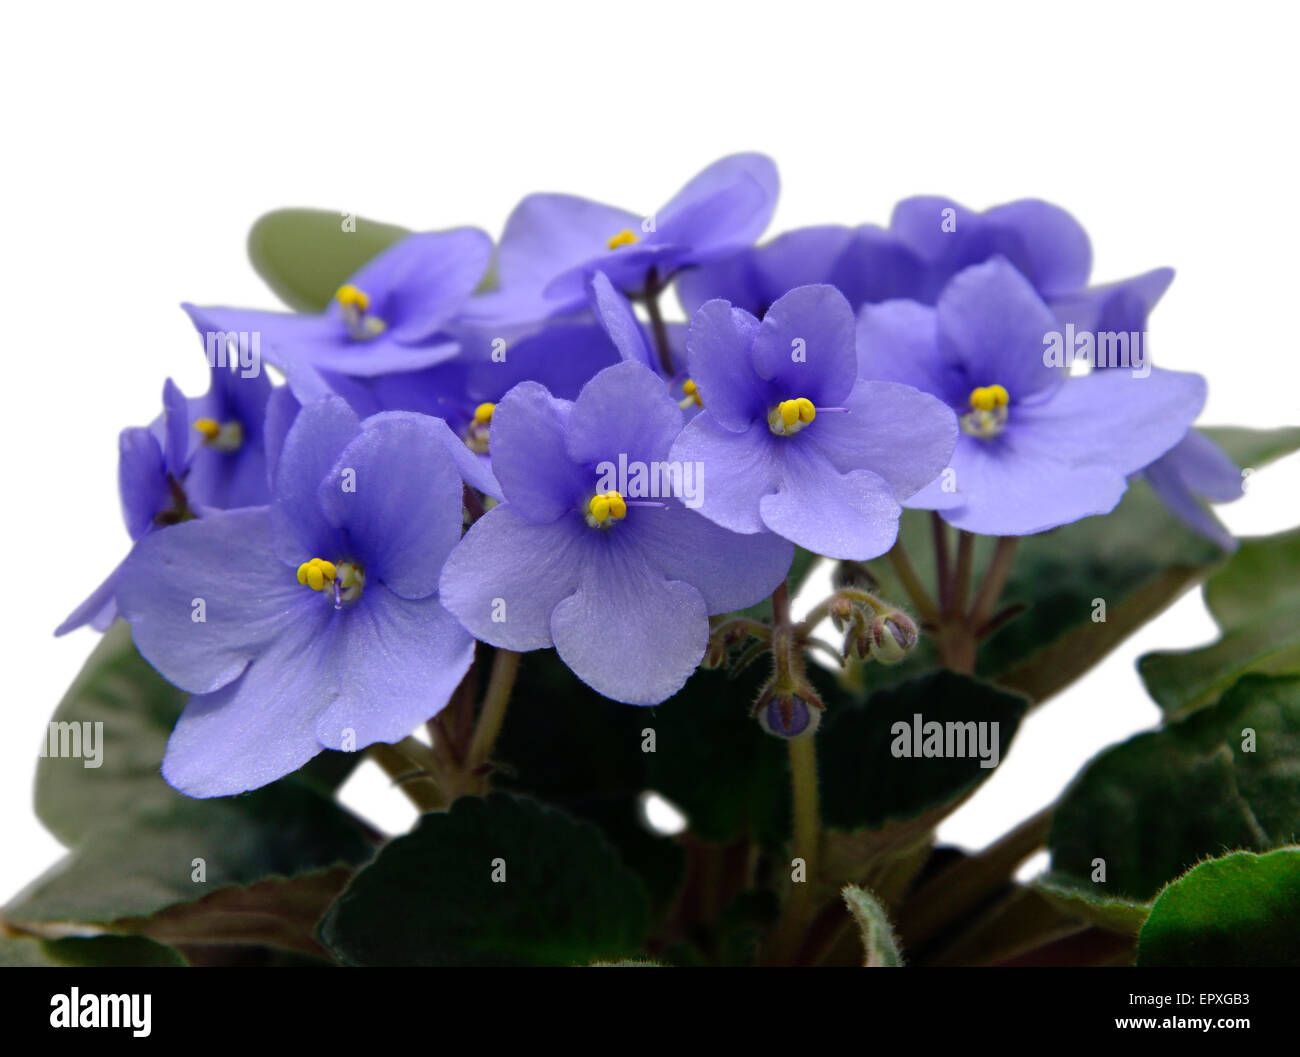 Flowers of Saintpaulia African Violet isolated on white Stock Photo